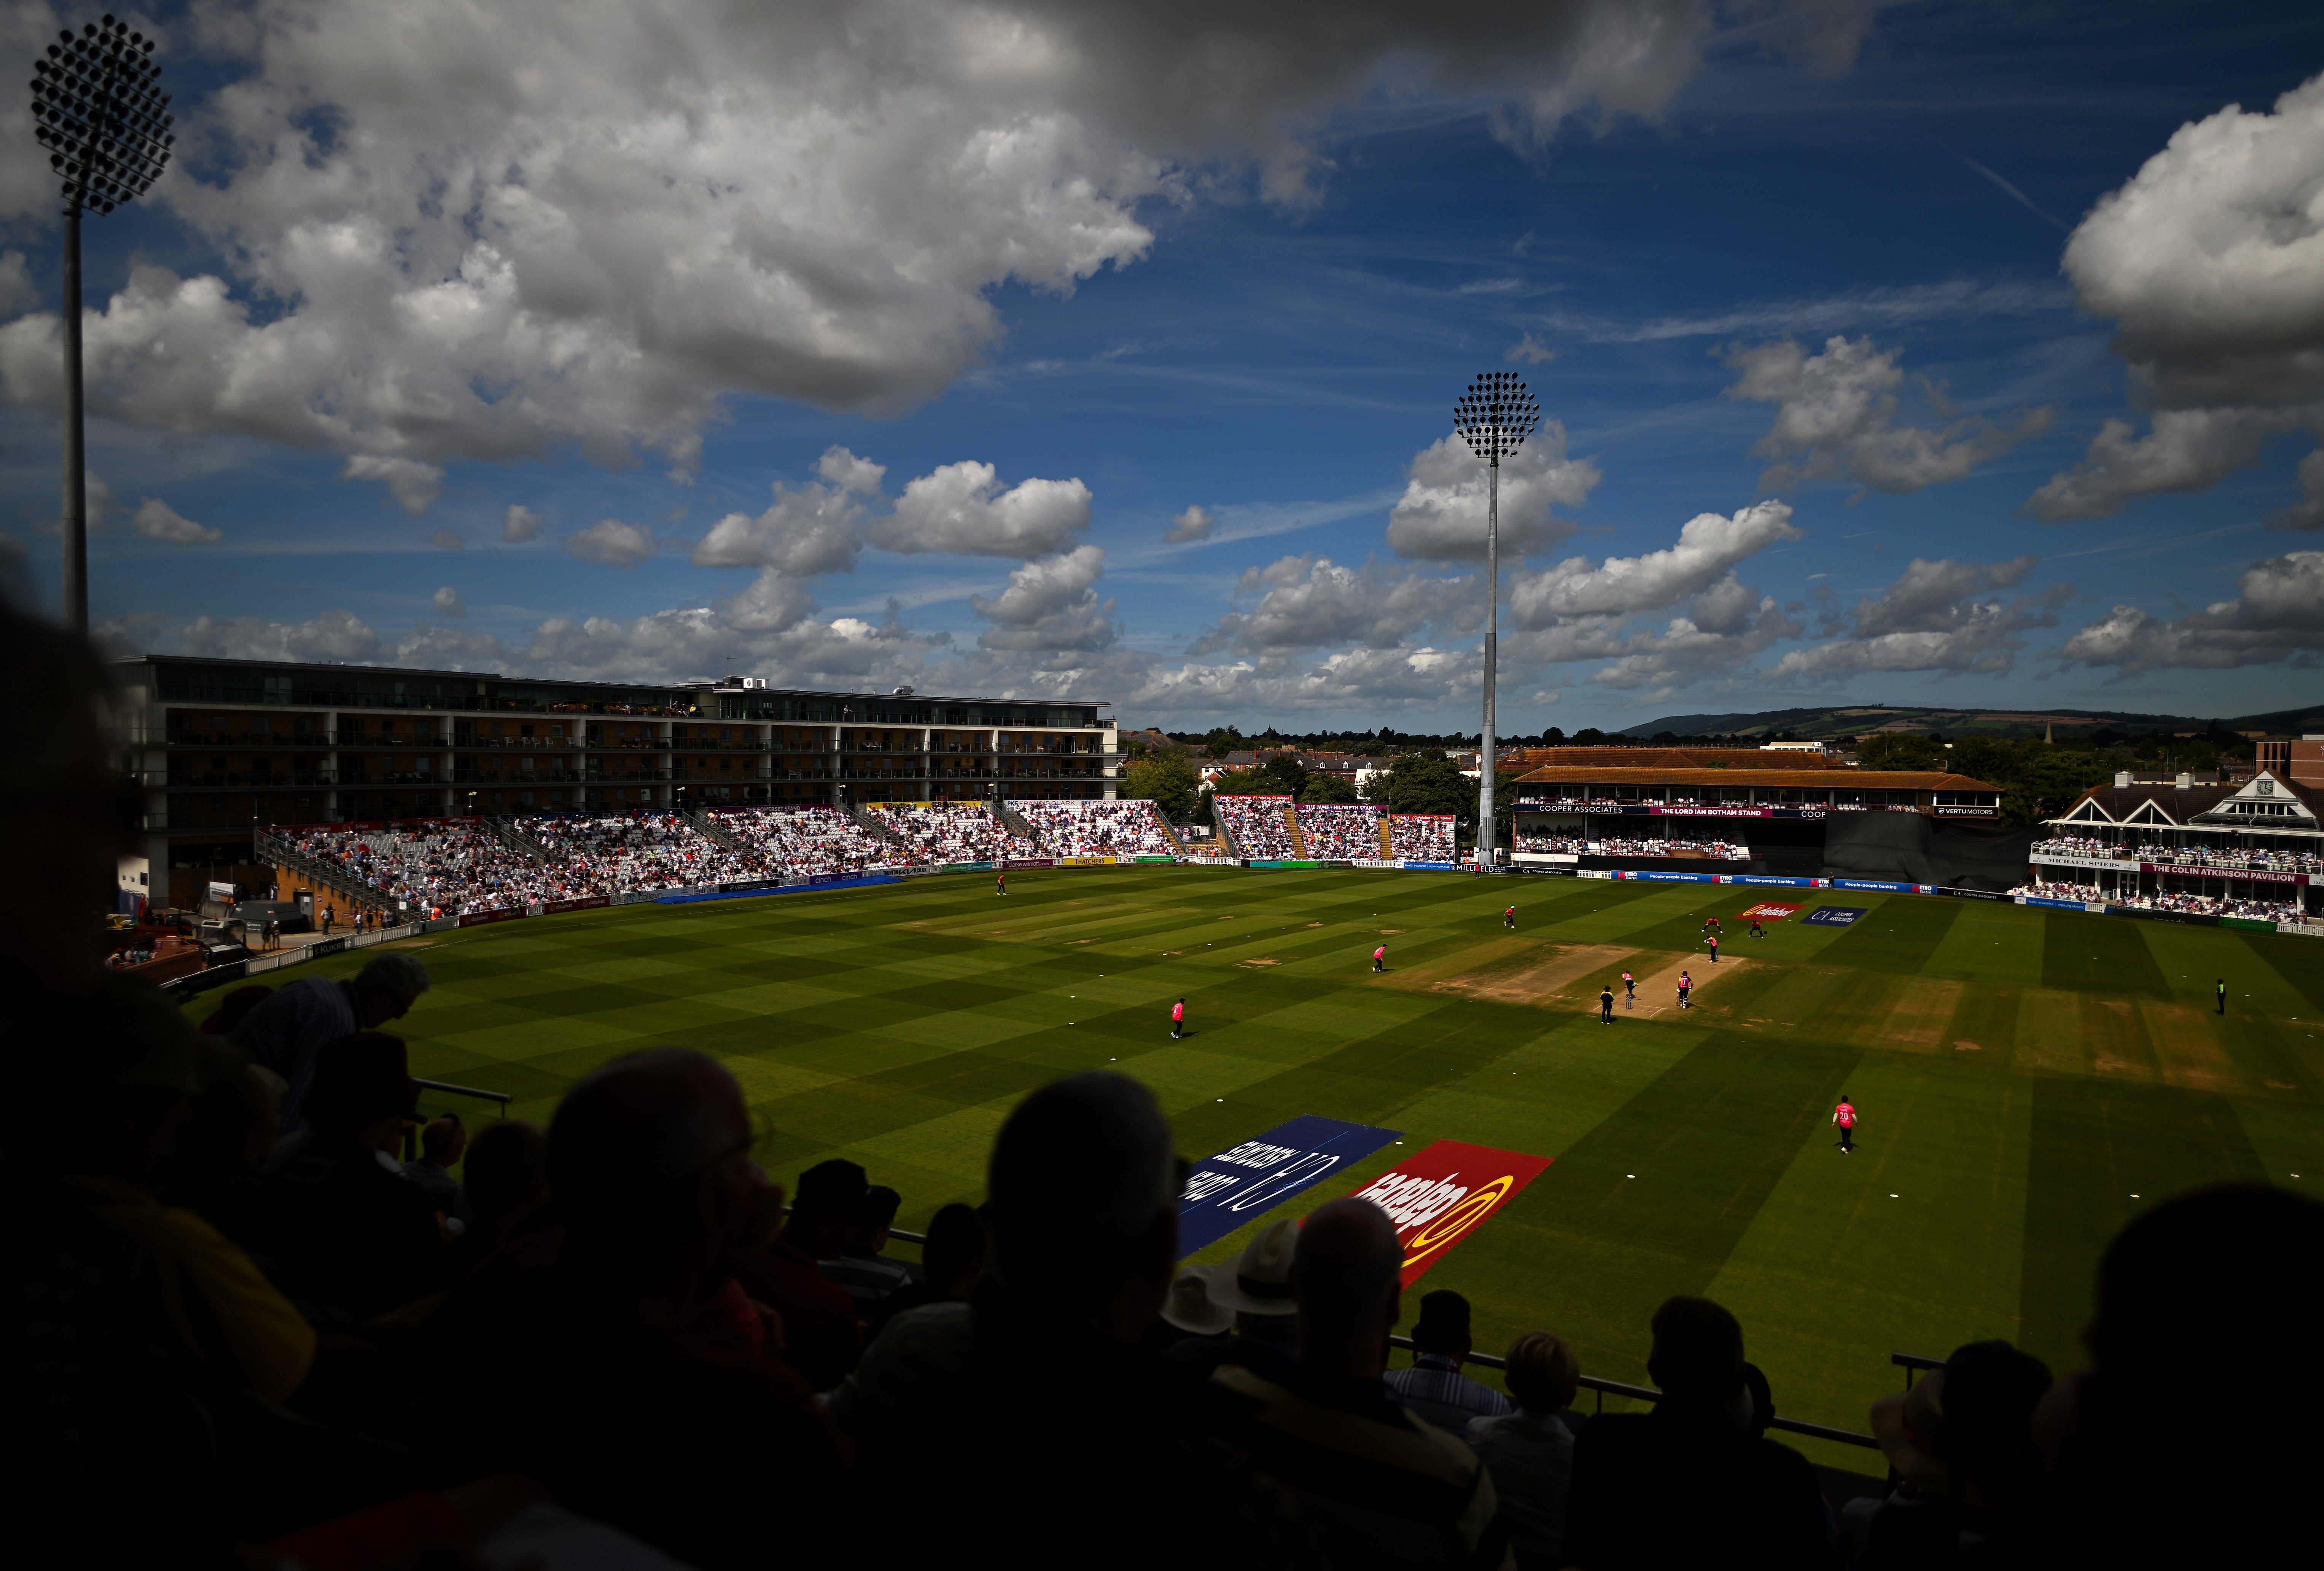 County cricket needs private investment, insists the former Hampshire chairman